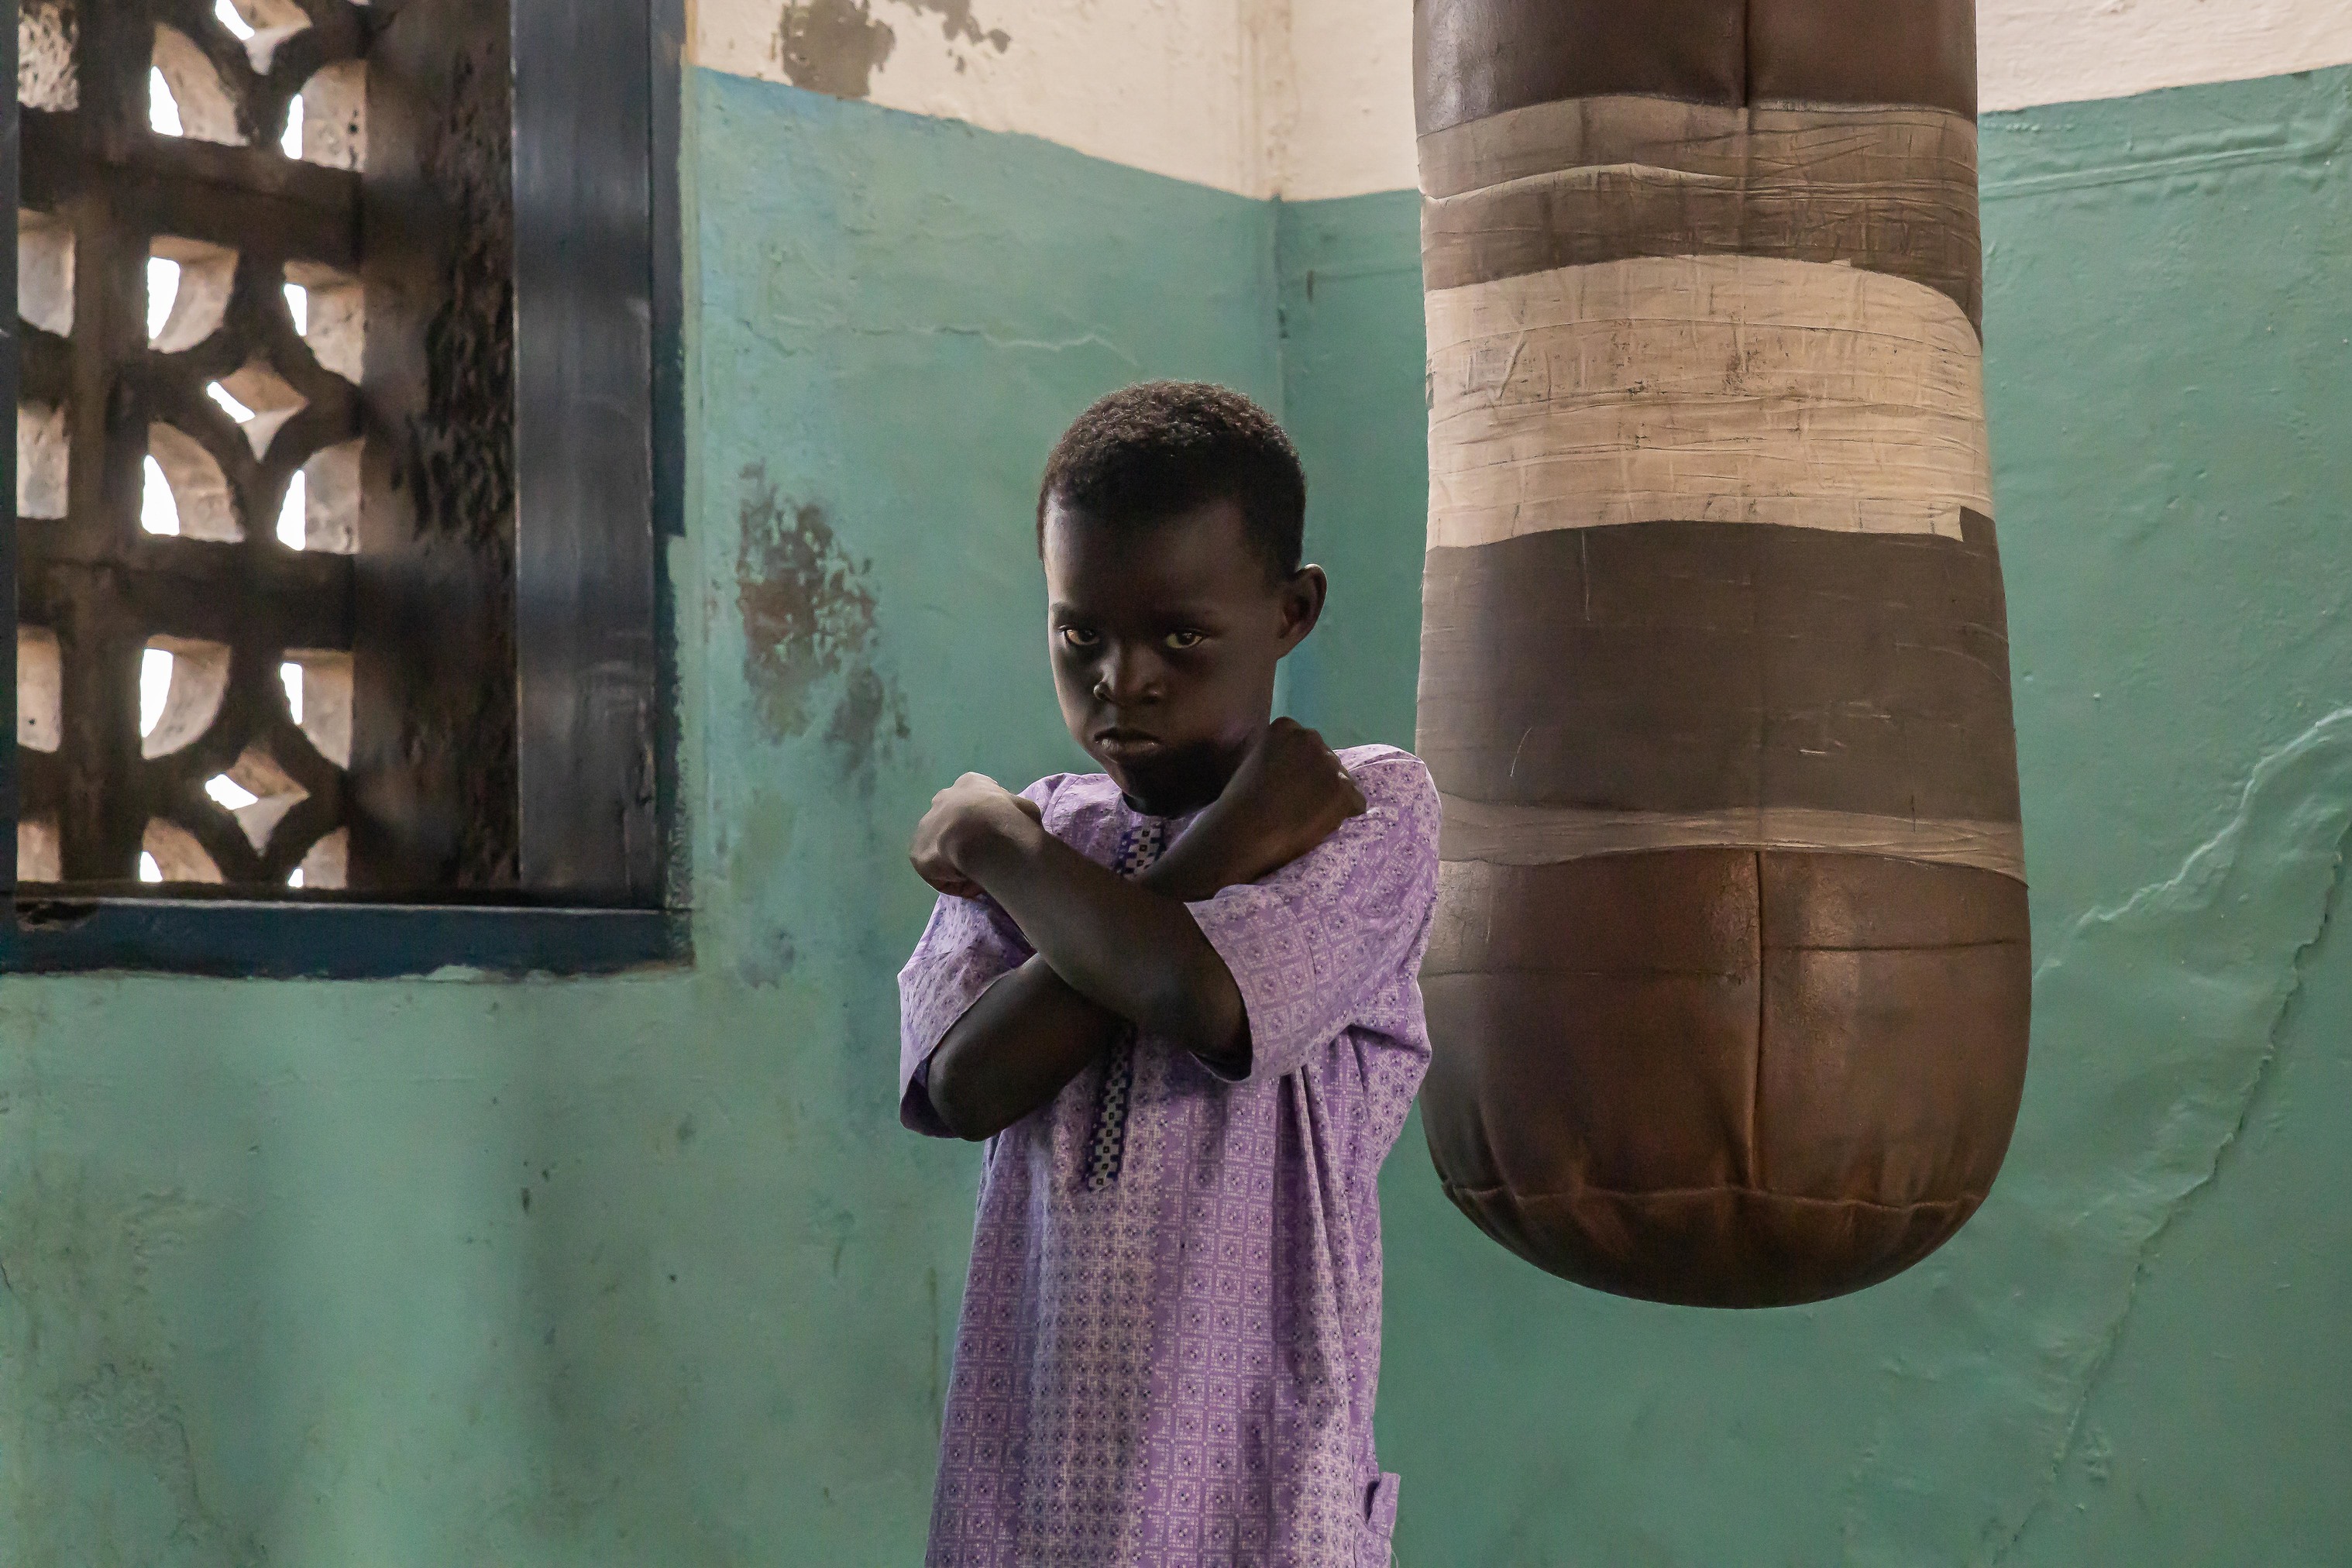 Boxing benefits Accra’s urban children who would otherwise engage in violence, becoming aggressive and undisciplined. Most of the city’s youth, who come from poor households, find support and structure by participating in training and matches. 